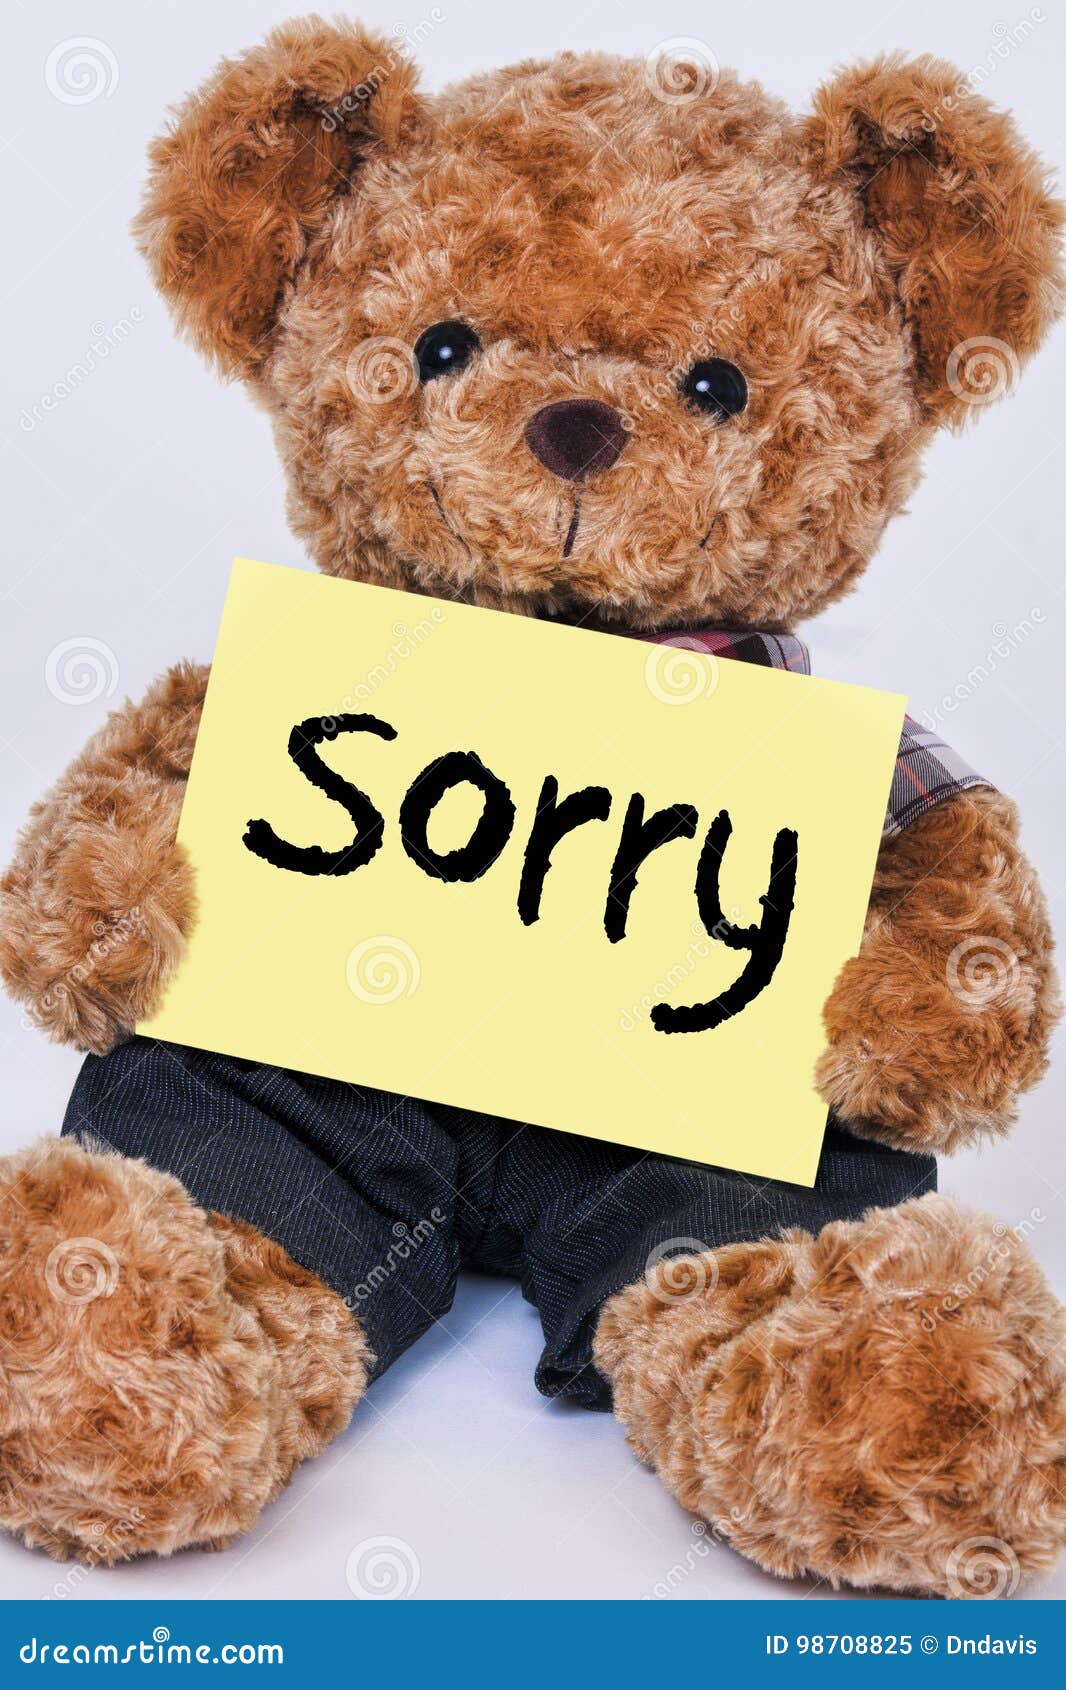 Cute Teddy Bear Holding a Yellow Sign that Says Sorry Stock Image ...